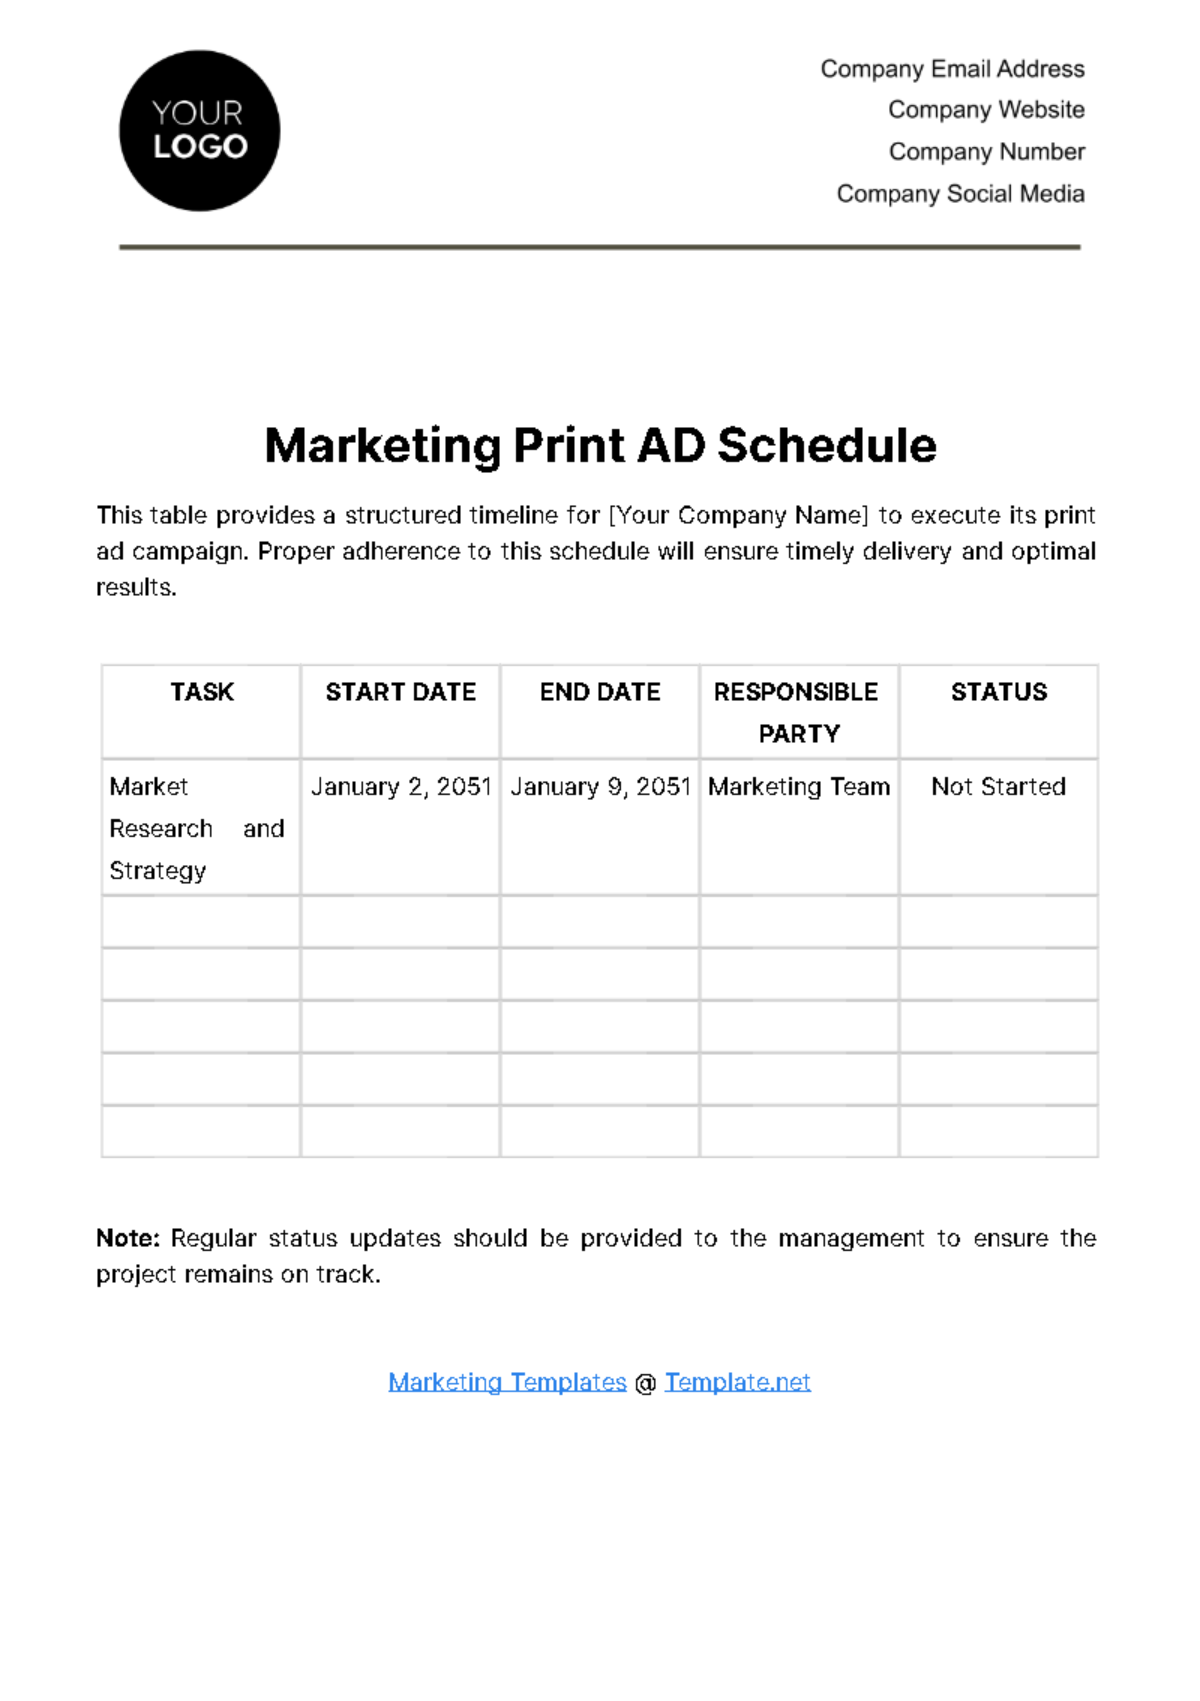 Free Marketing Print Ad Schedule Template